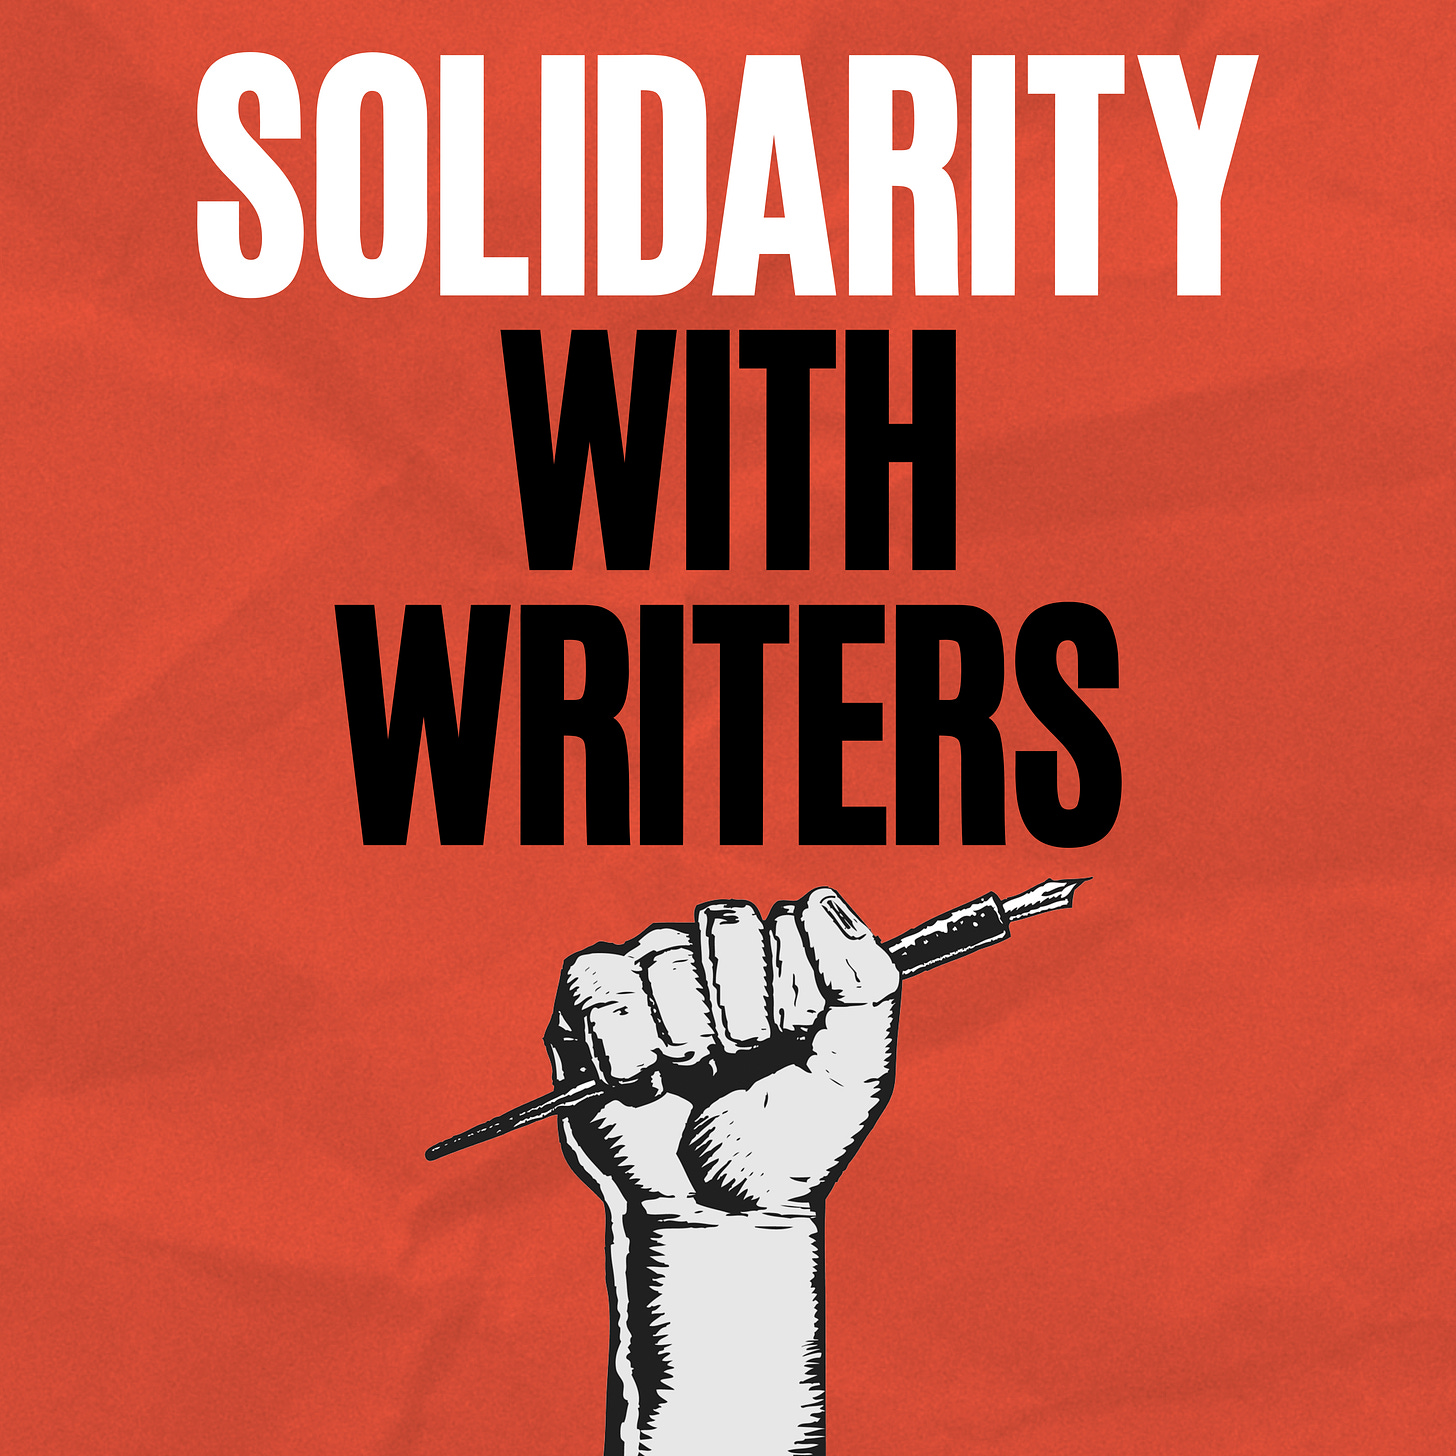 WGA Strike Image of a fist holding a fountain pen. Caption reads Solidarity with writers.